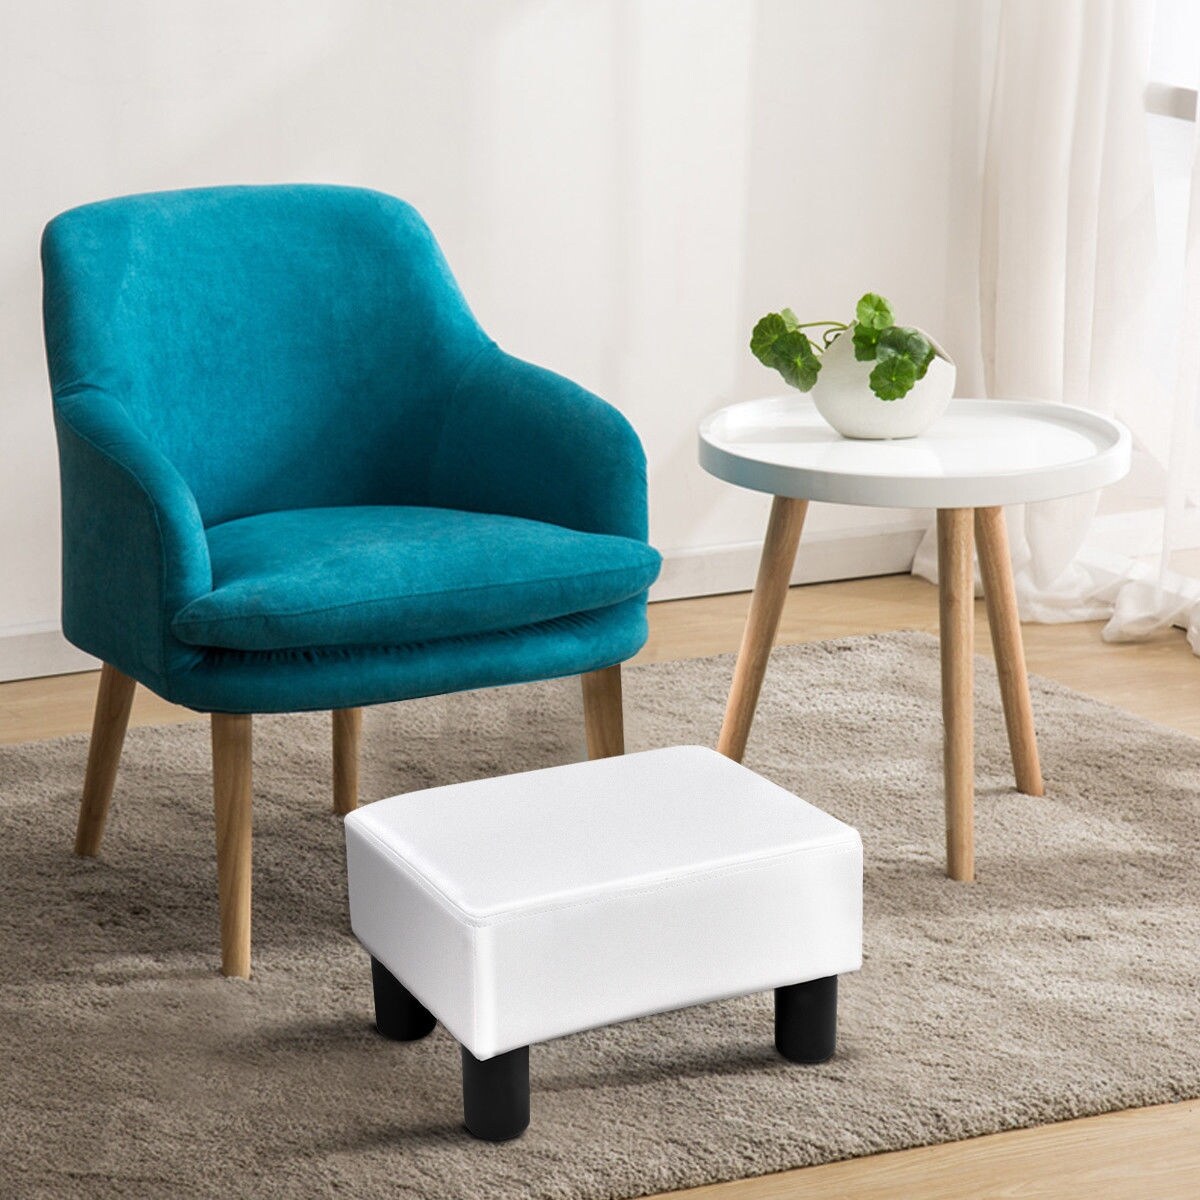 https://ak1.ostkcdn.com/images/products/is/images/direct/4f4b87f0224ae2163bcd79e8c6d0de7546a2eefa/Costway-Small-Ottoman-Footrest-PU-Leather-Footstool-Rectangular-Seat-Stool-White.jpg